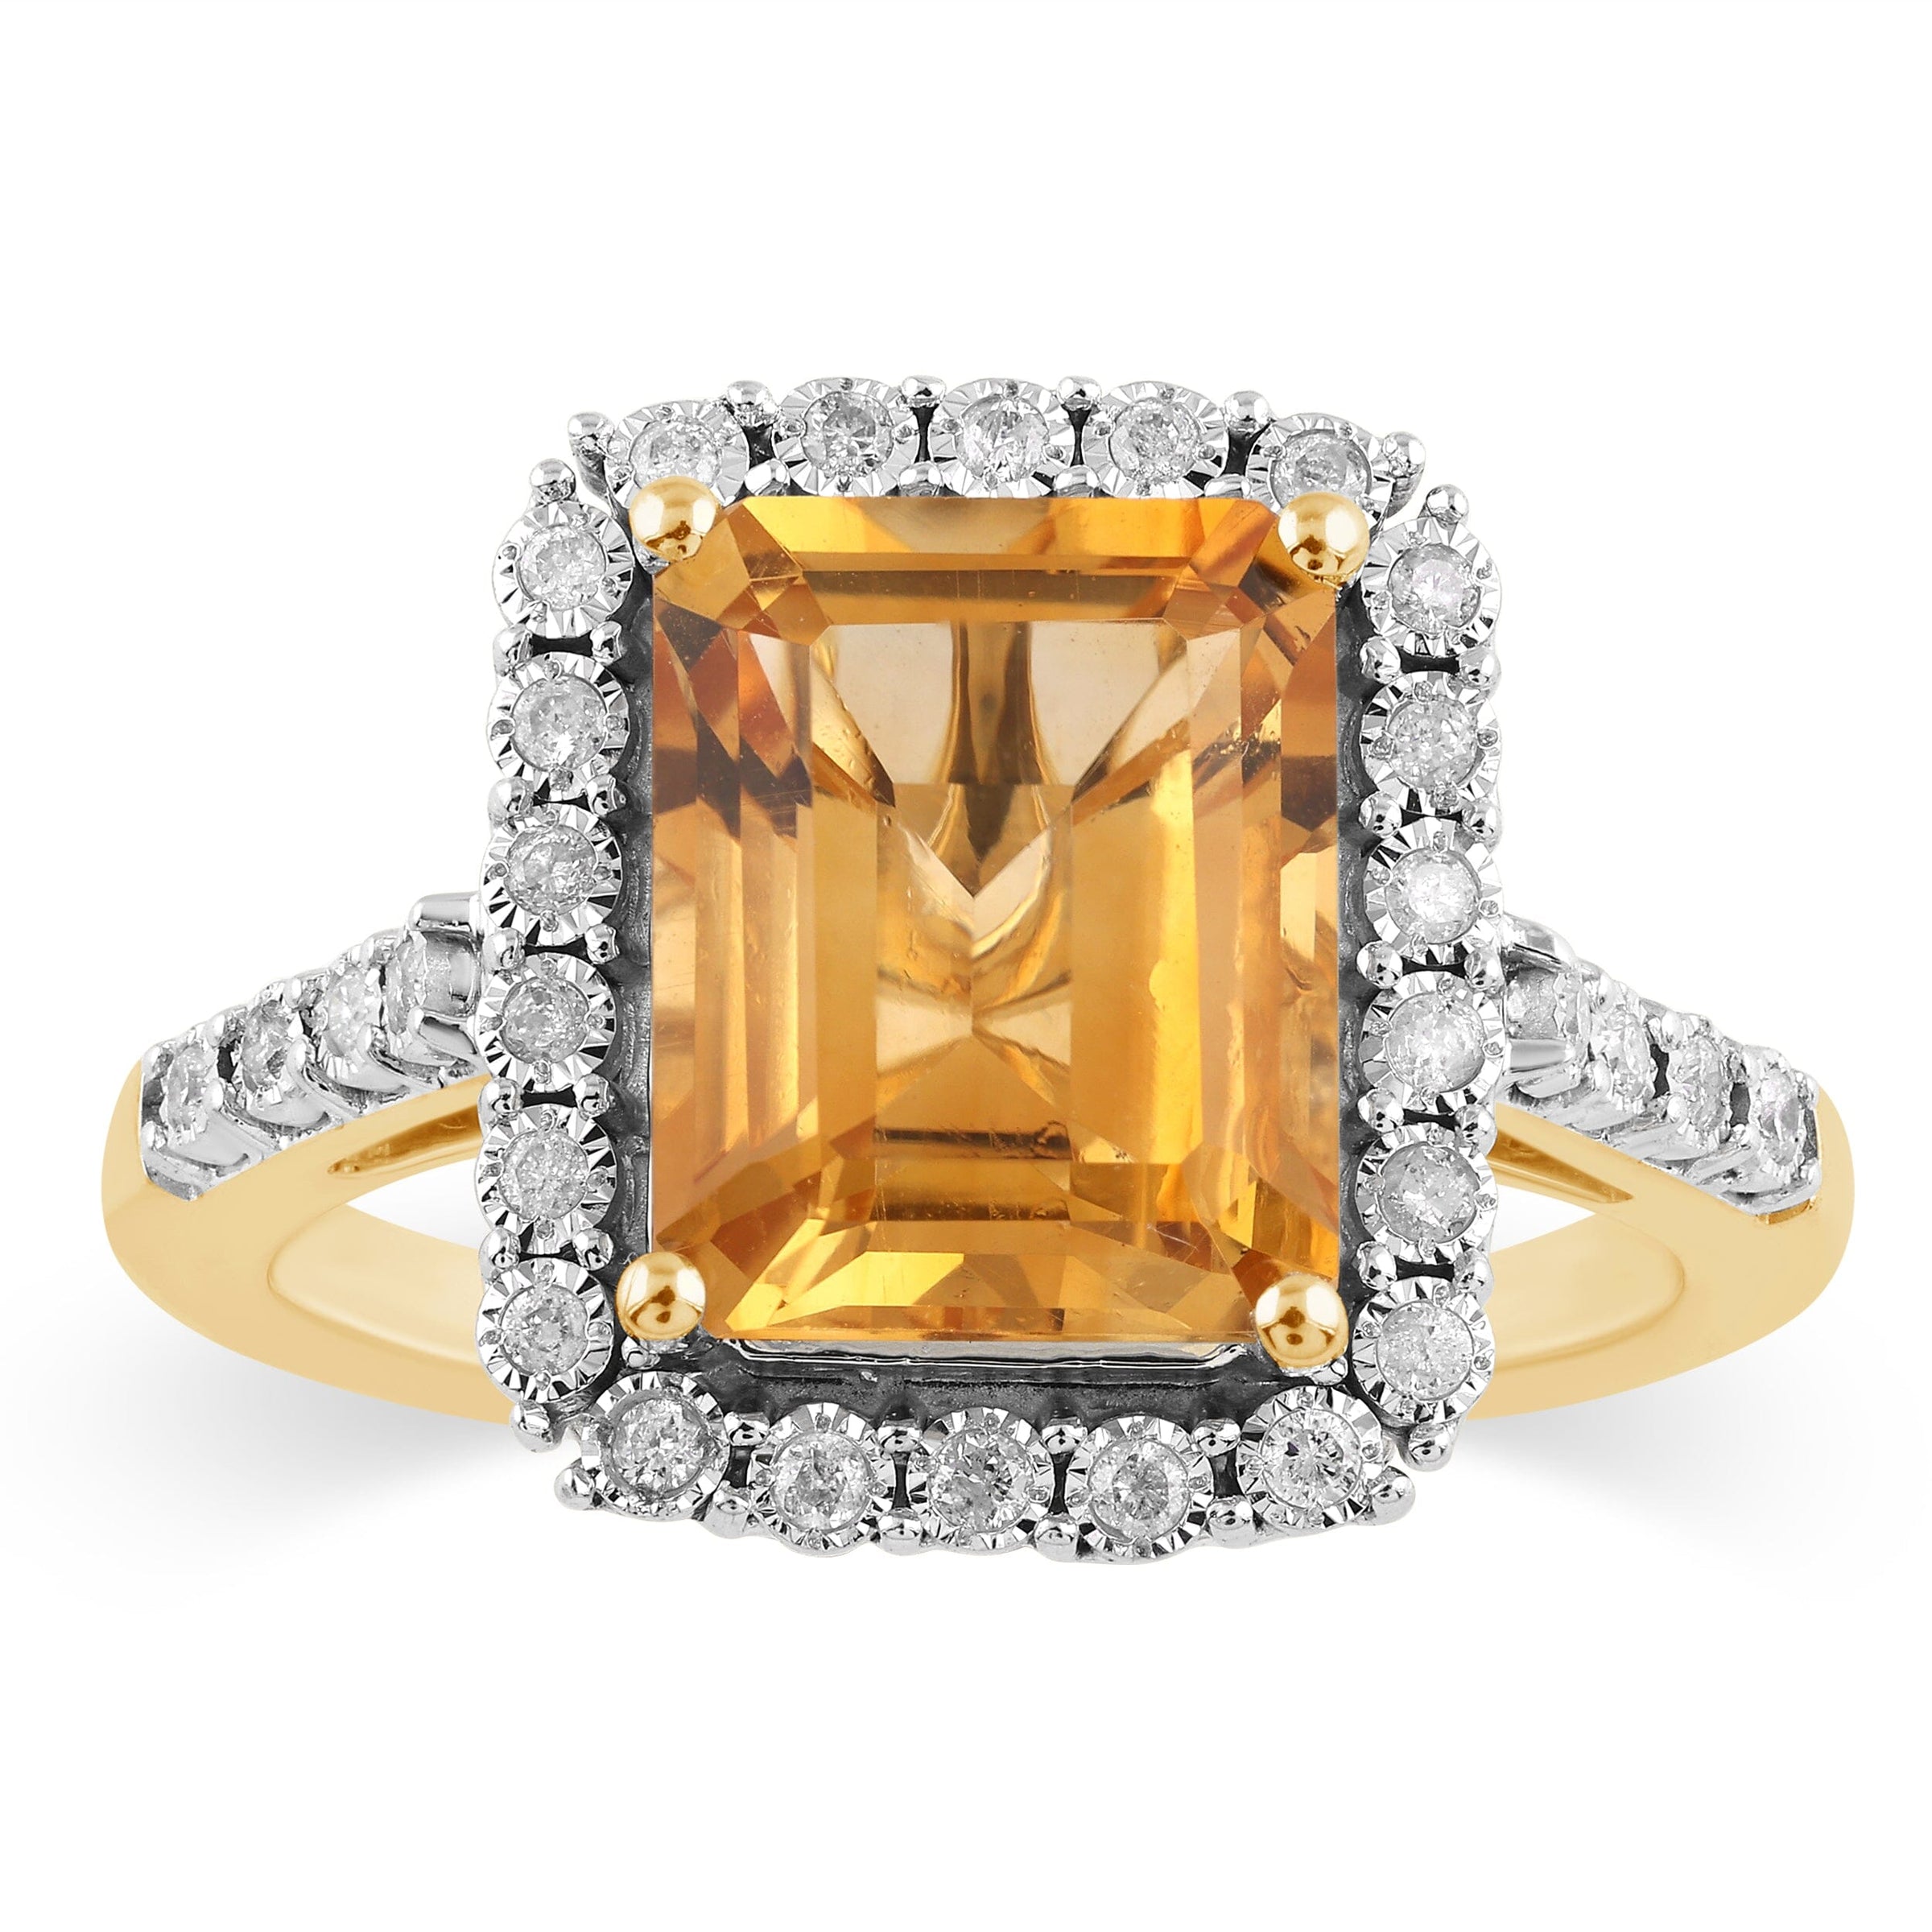 Emerald Cut Citrine Ring with 0.15ct of Diamonds in 9ct Yellow Gold Rings Bevilles 